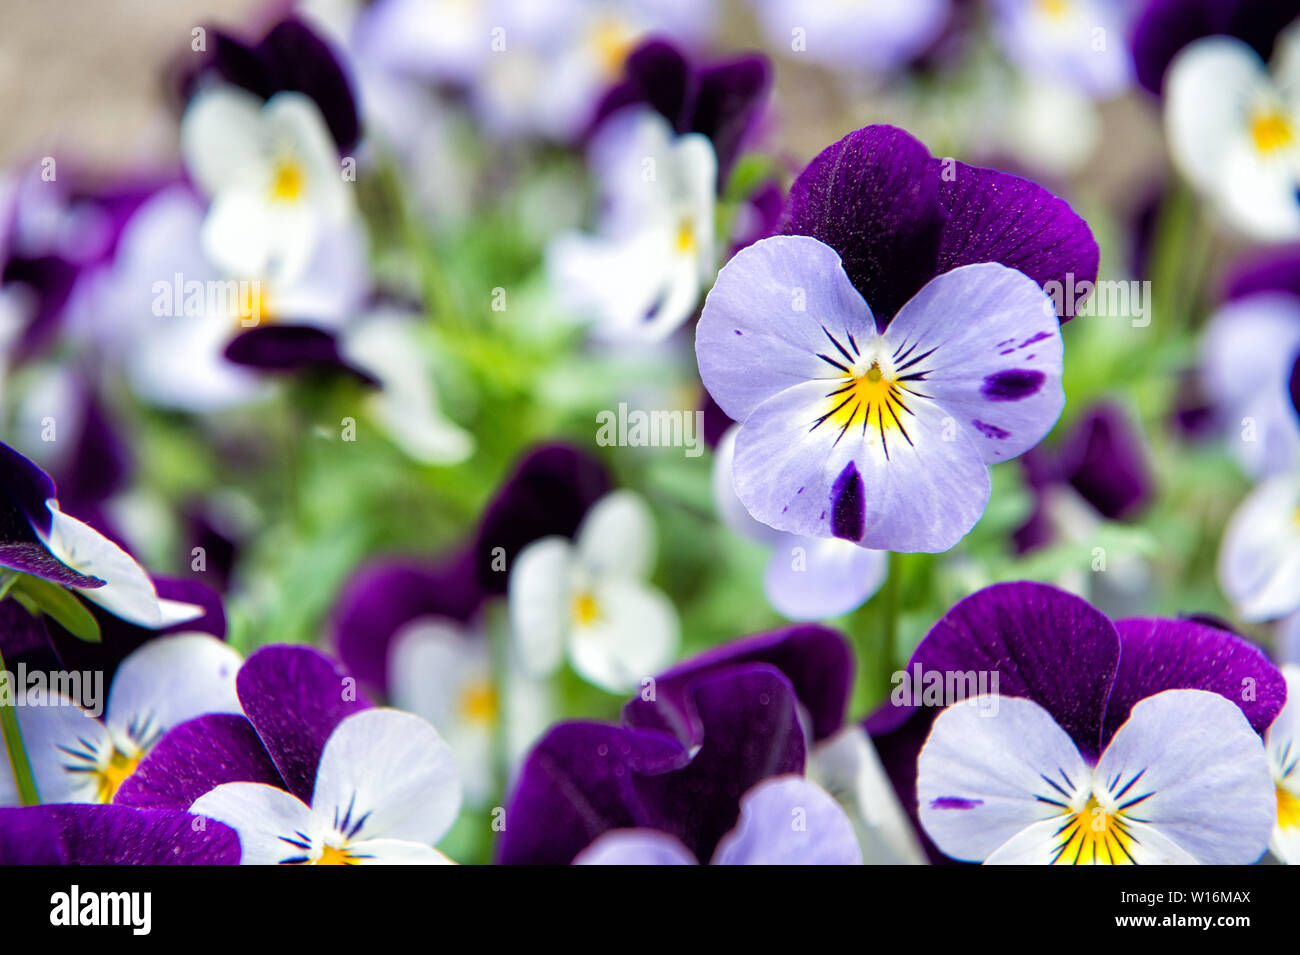 Robust and blooming. Garden pansy with purple and white petals. Hybrid pansy. Viola tricolor pansy in flowerbed. Pansy flowers showing typical facial markings. Stock Photo